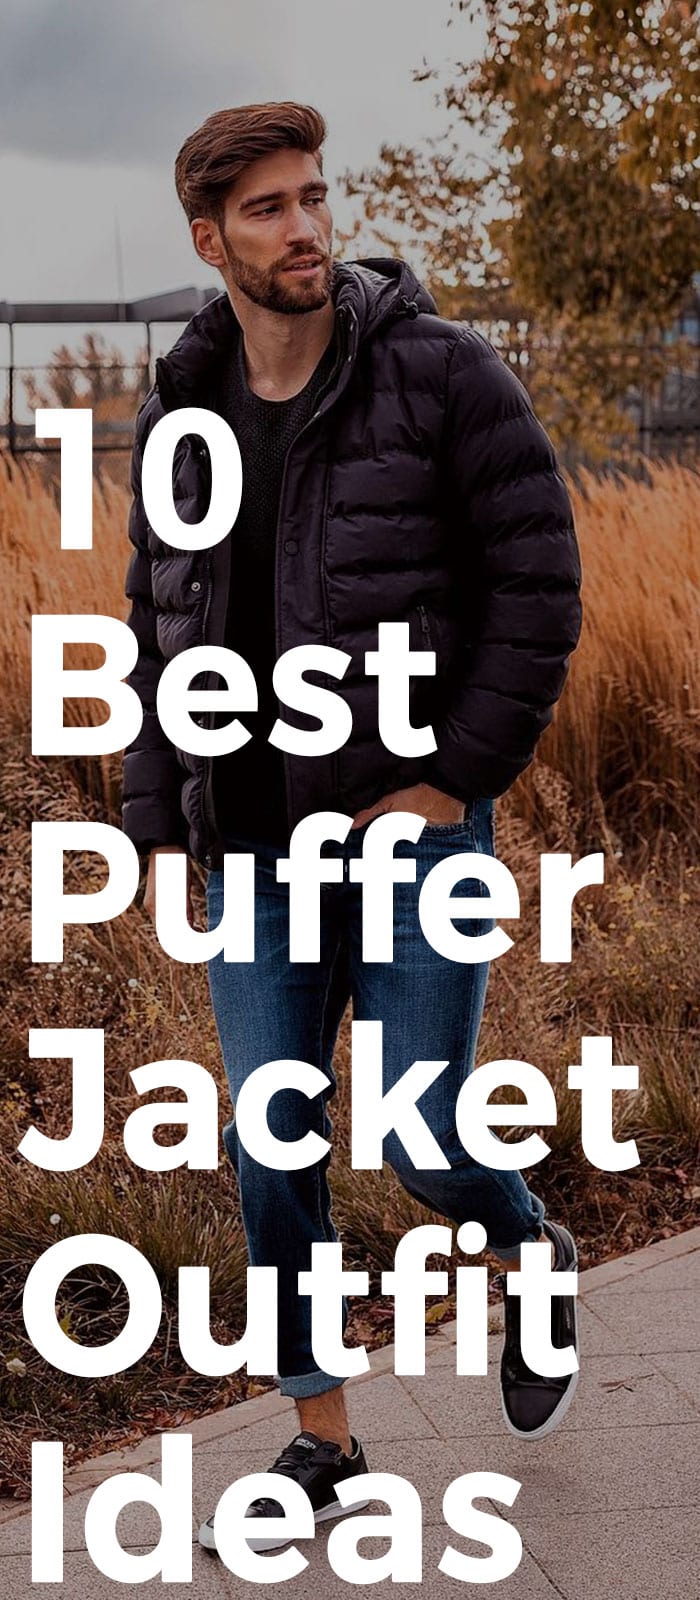 10 Best Puffer Jacket Outfit Ideas.